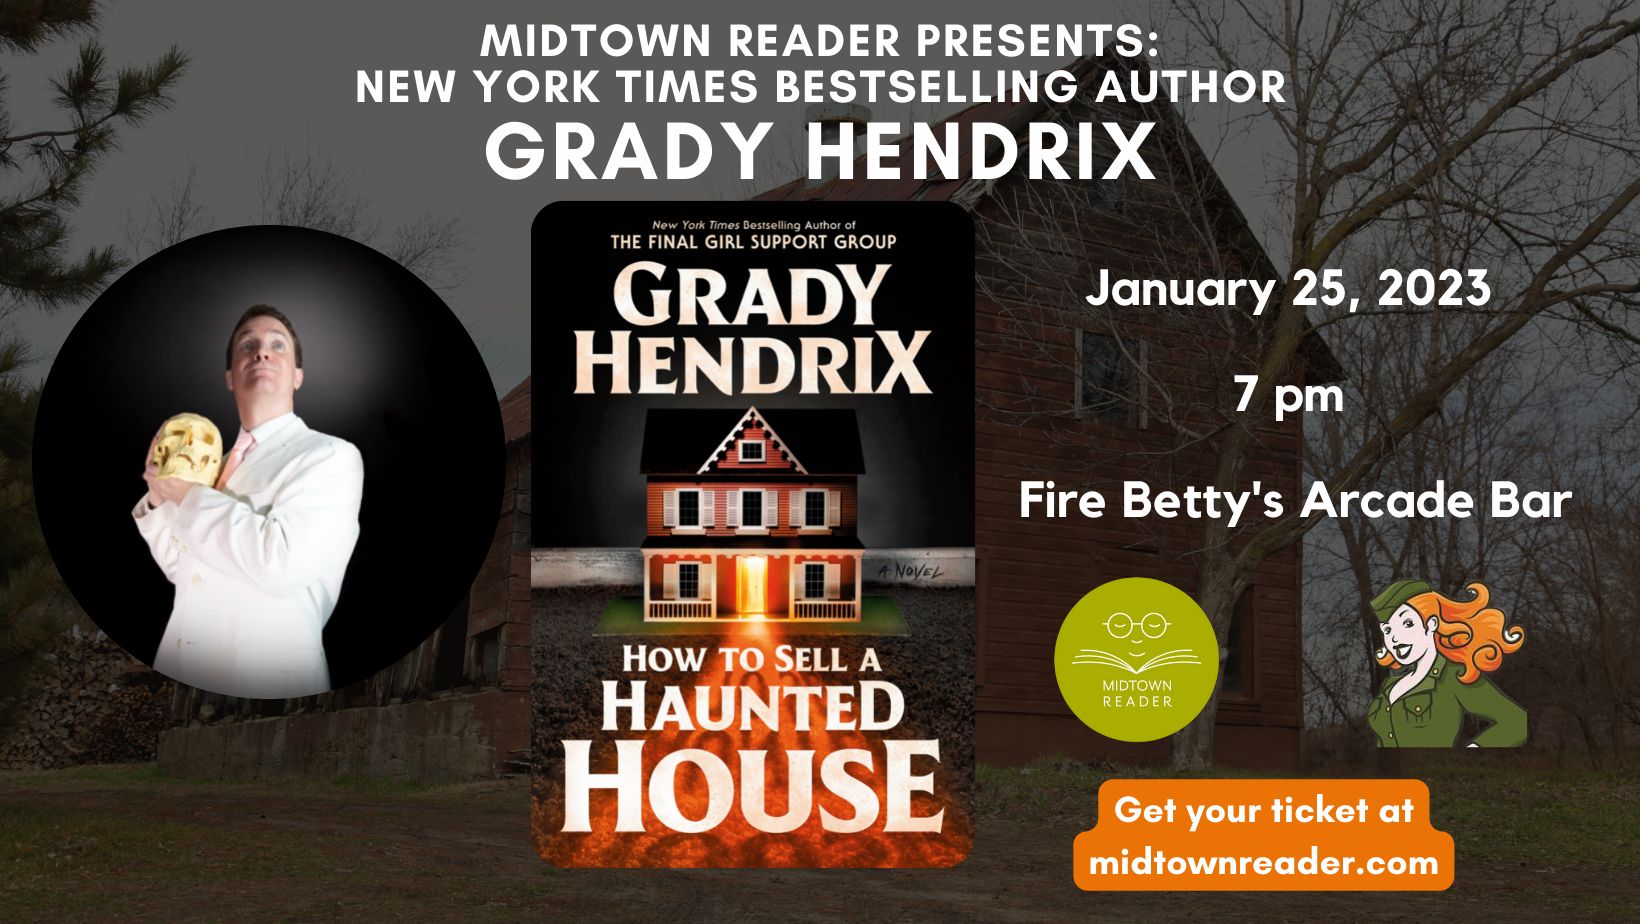 Grady Hendrix with How To Sell A Haunted House, Tallahassee, Florida, United States